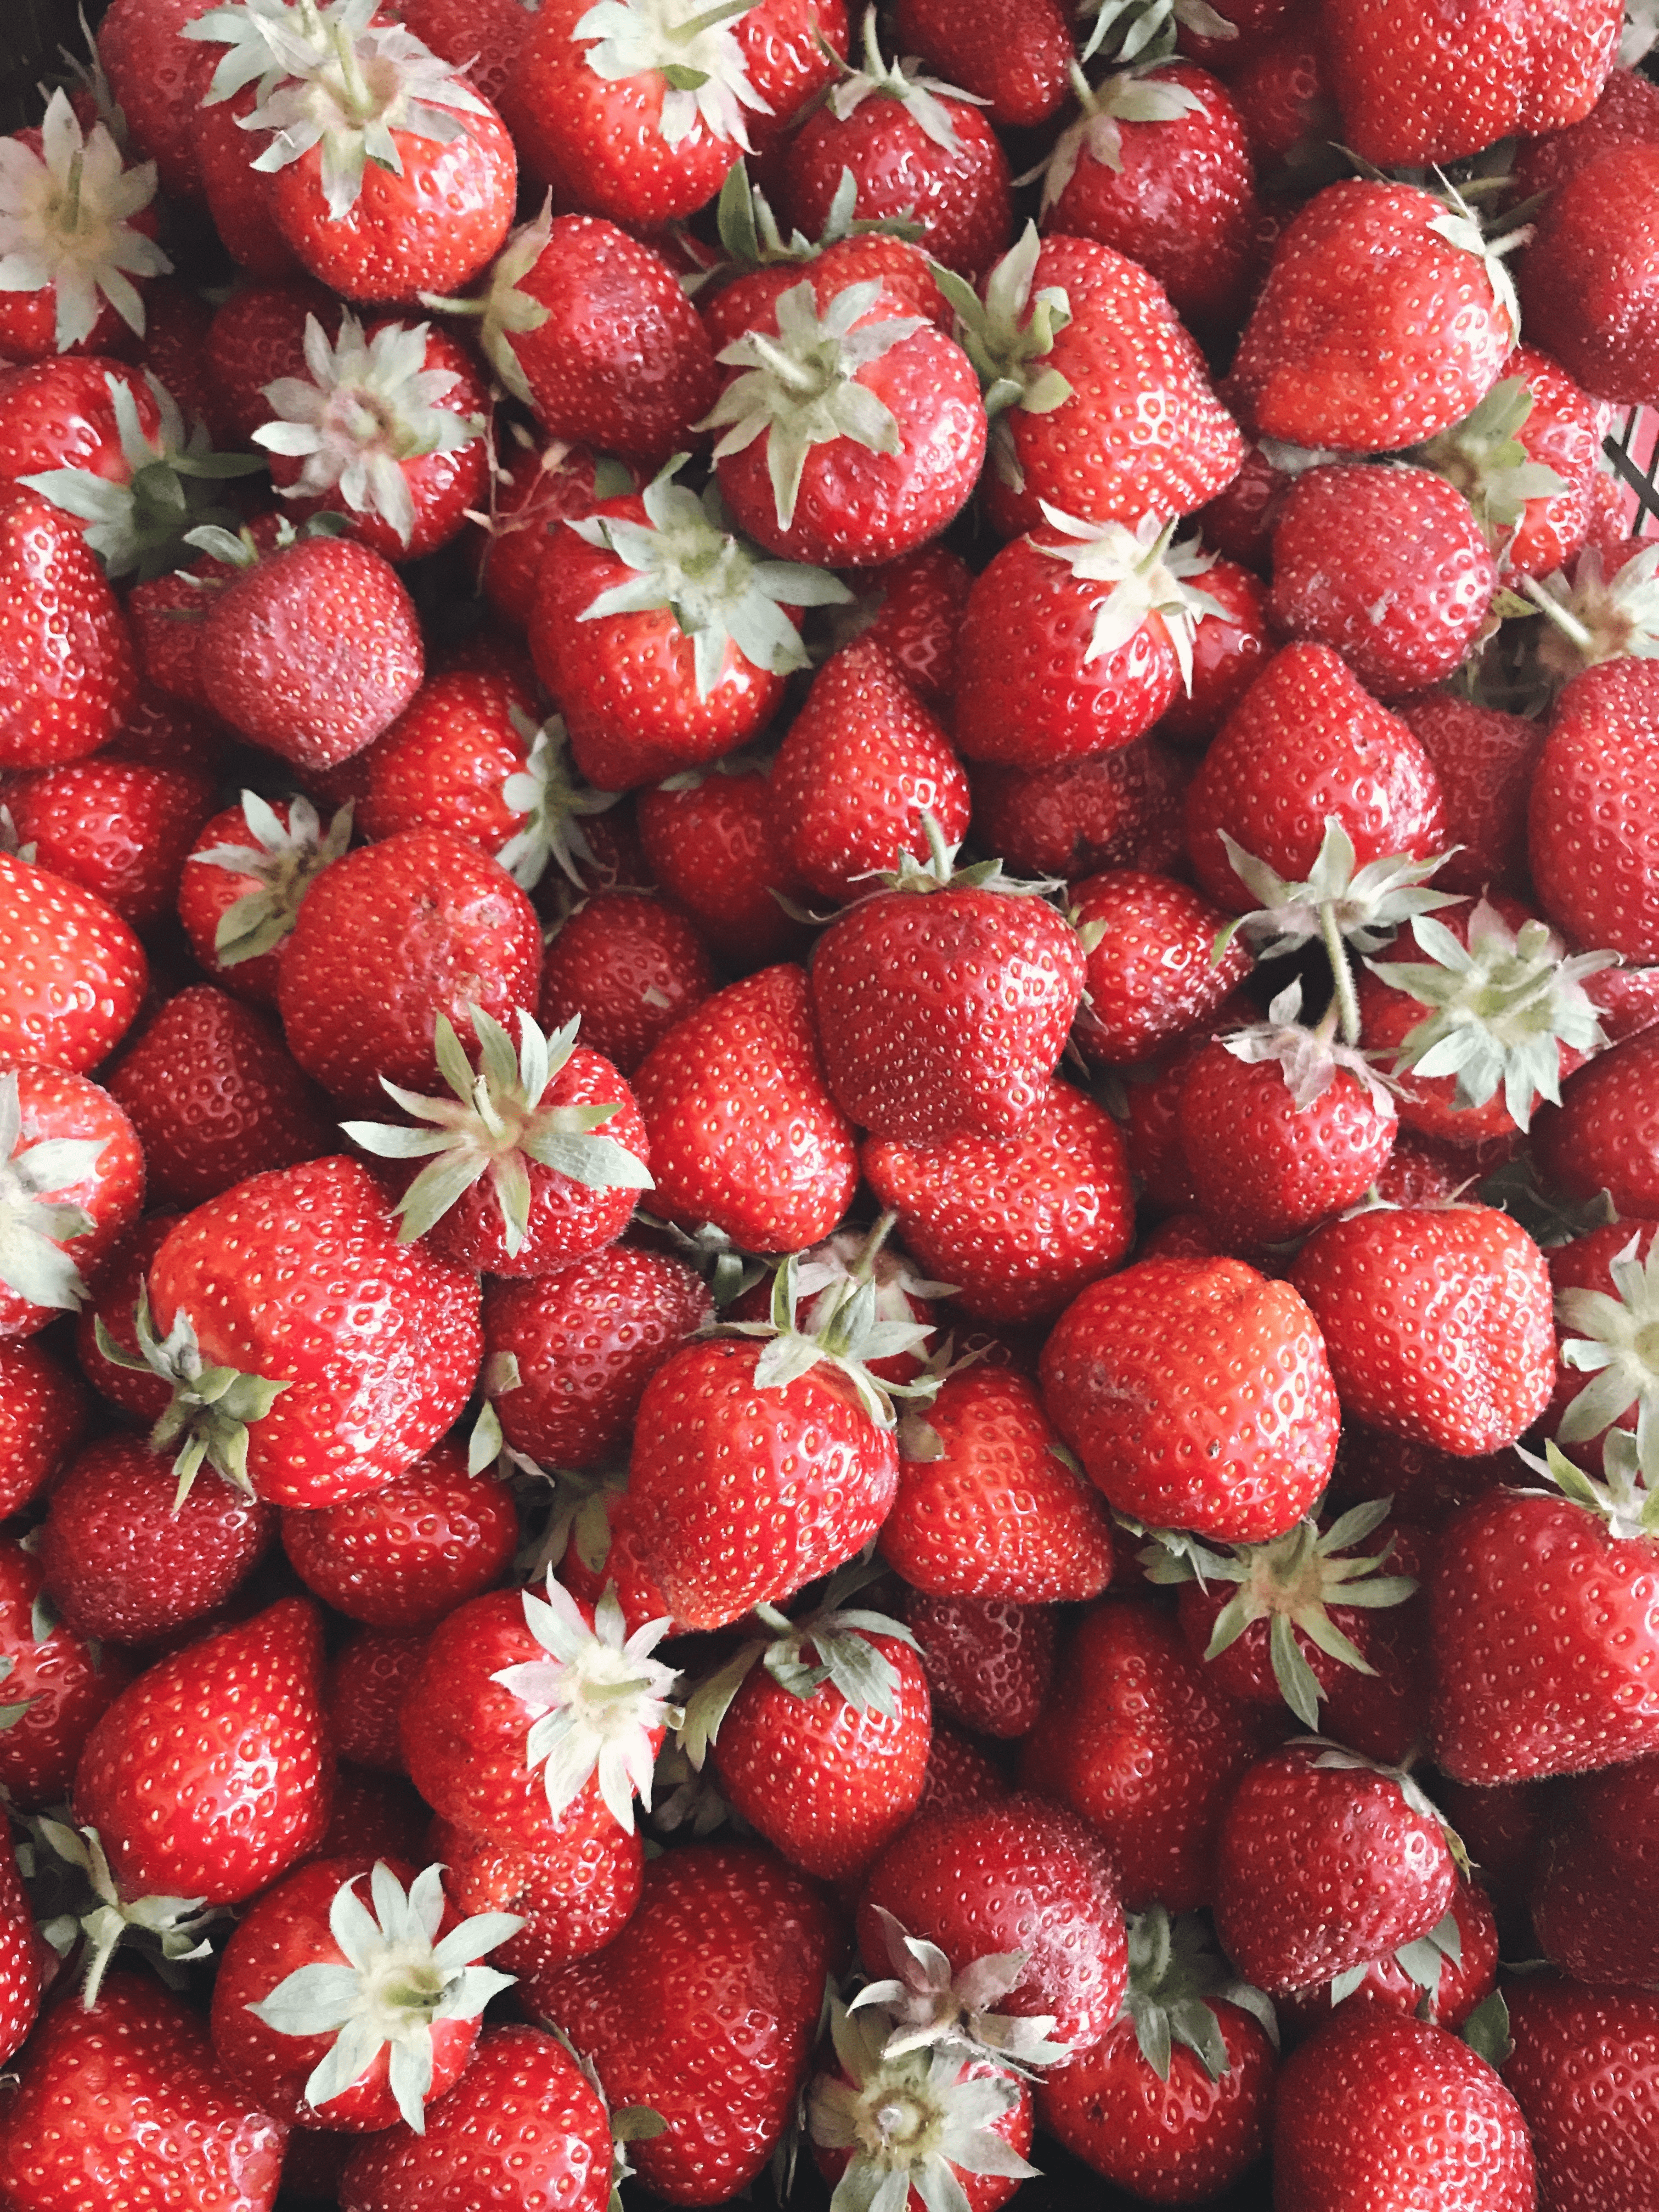 strawberries plucked from the farm